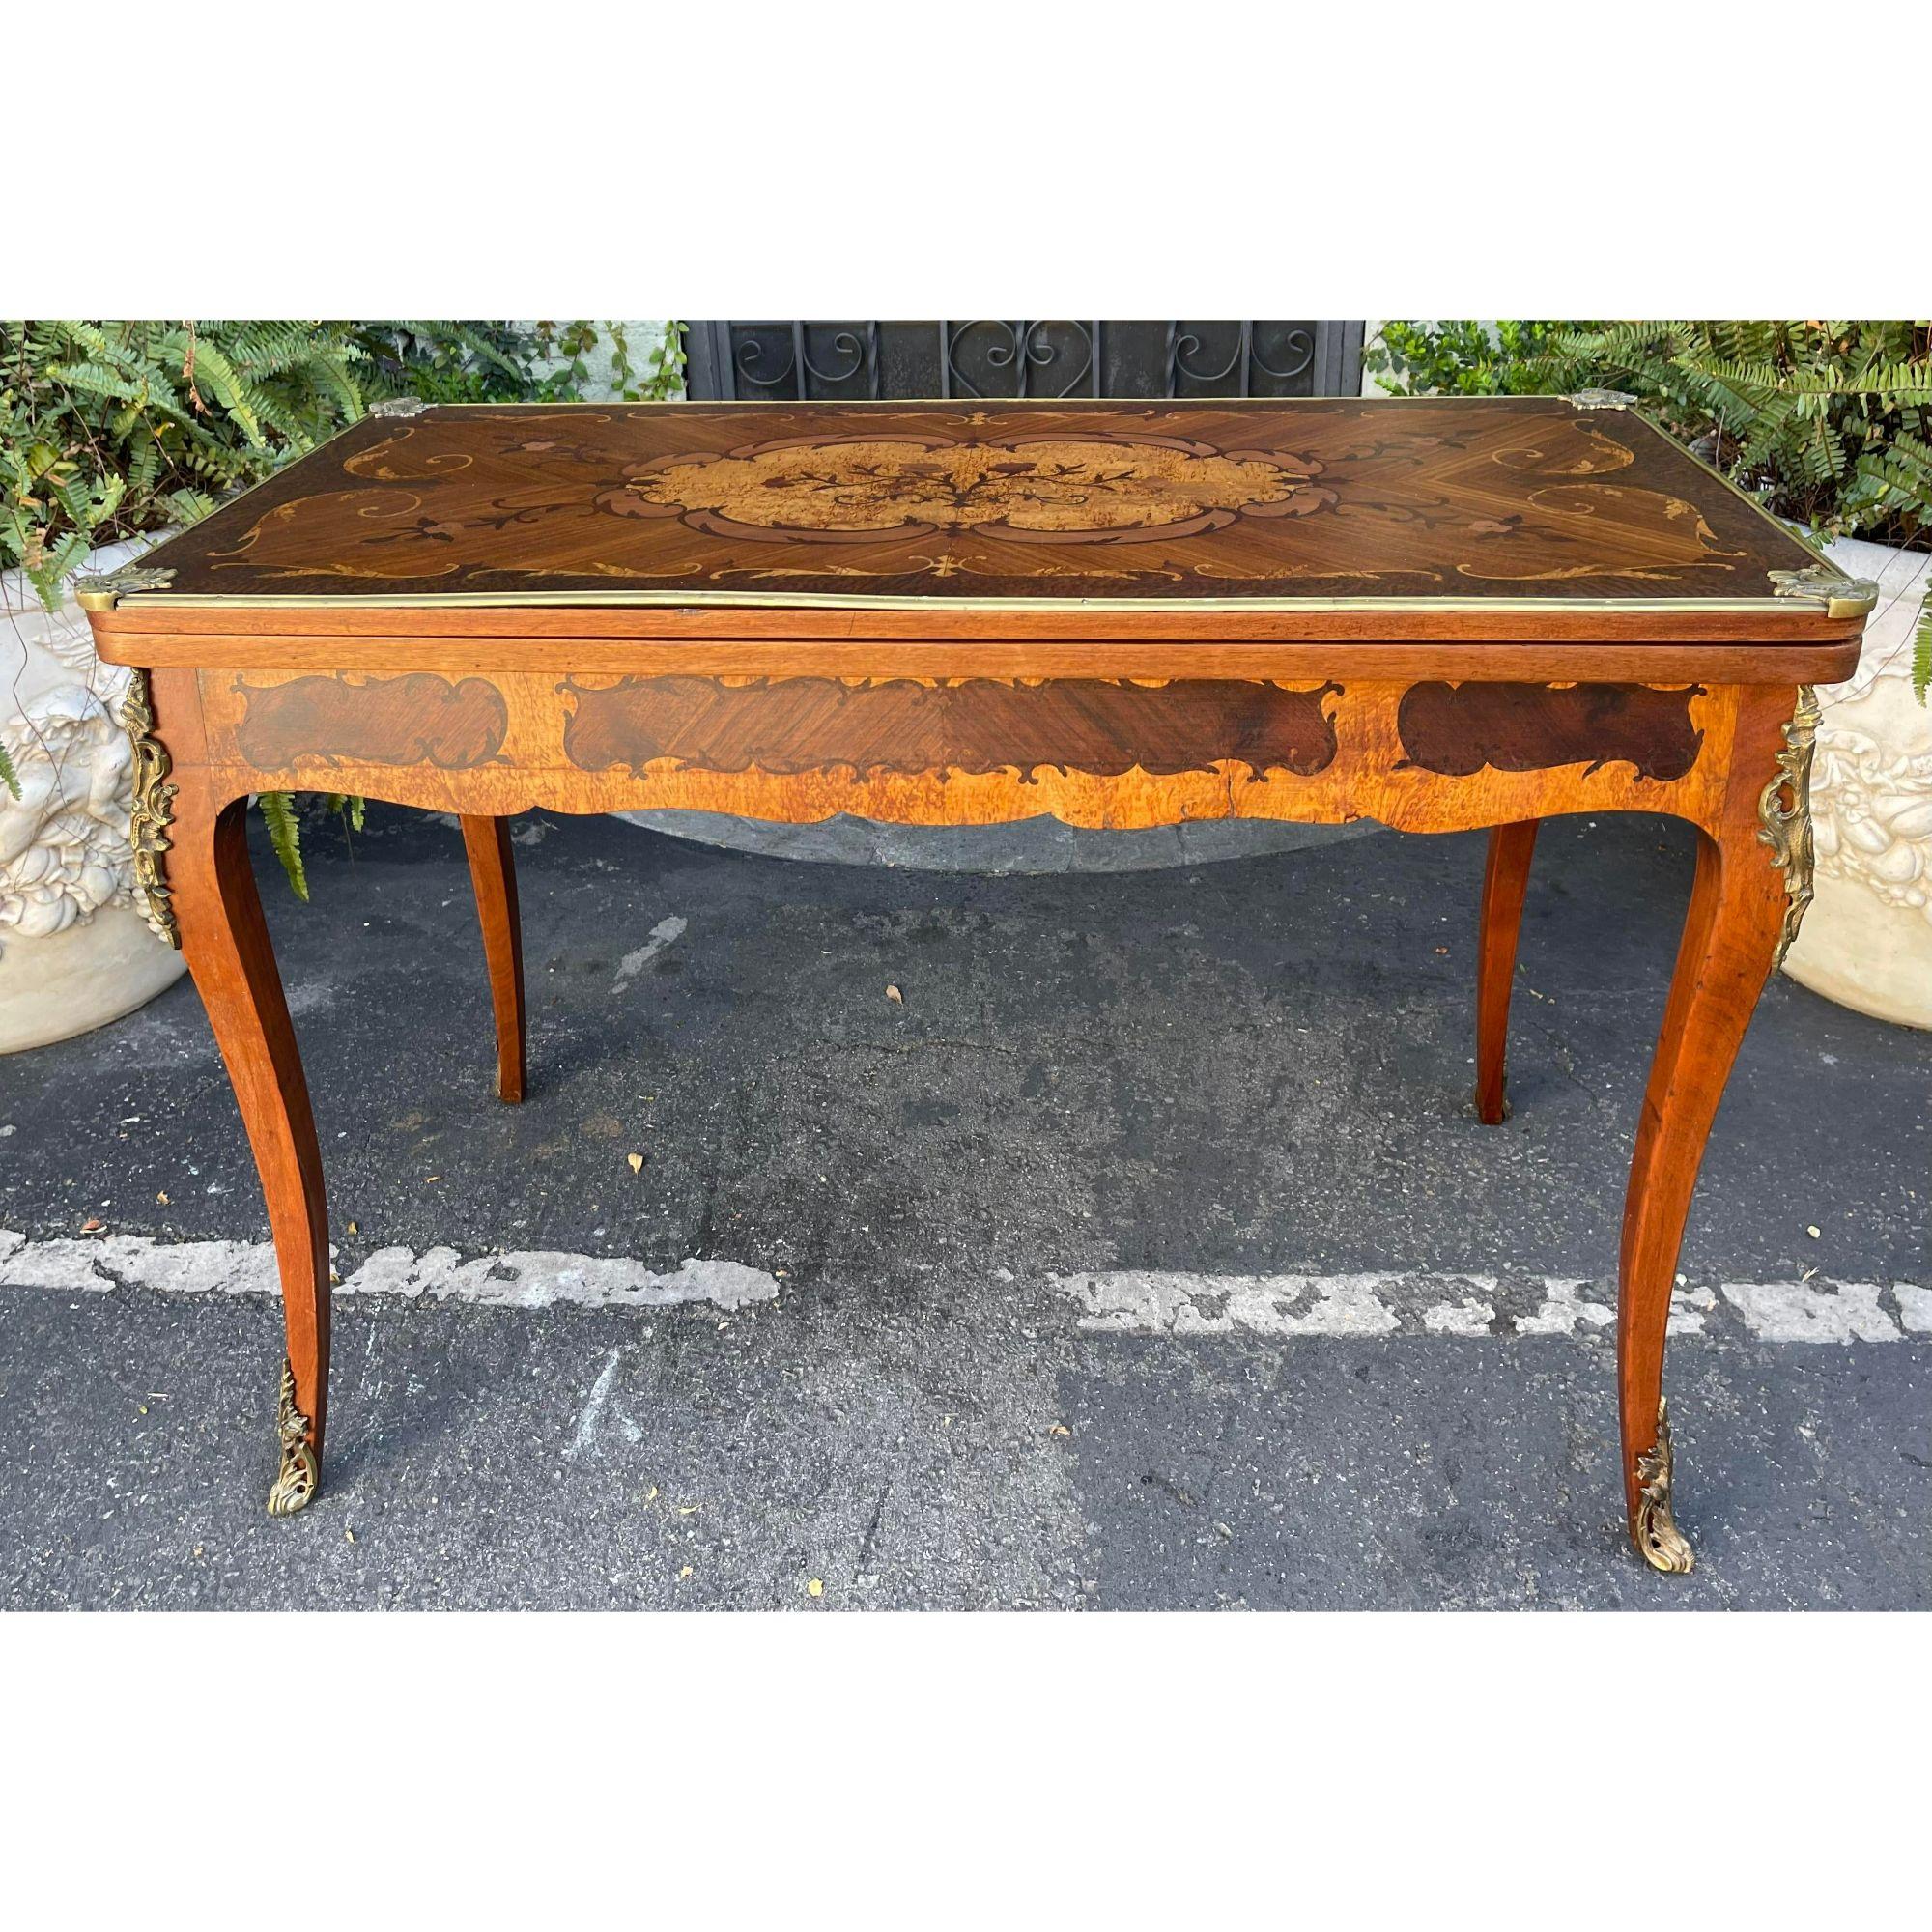 Antique Louis XV Style Bronze Mounted Marquetry Game Table

Additional information:
Materials: Bronze
Color: Bronze
Period: 19th Century
Styles: Louis XV
Table Shape: Rectangle
Item Type: Vintage, Antique or Pre-owned
Dimensions: 42